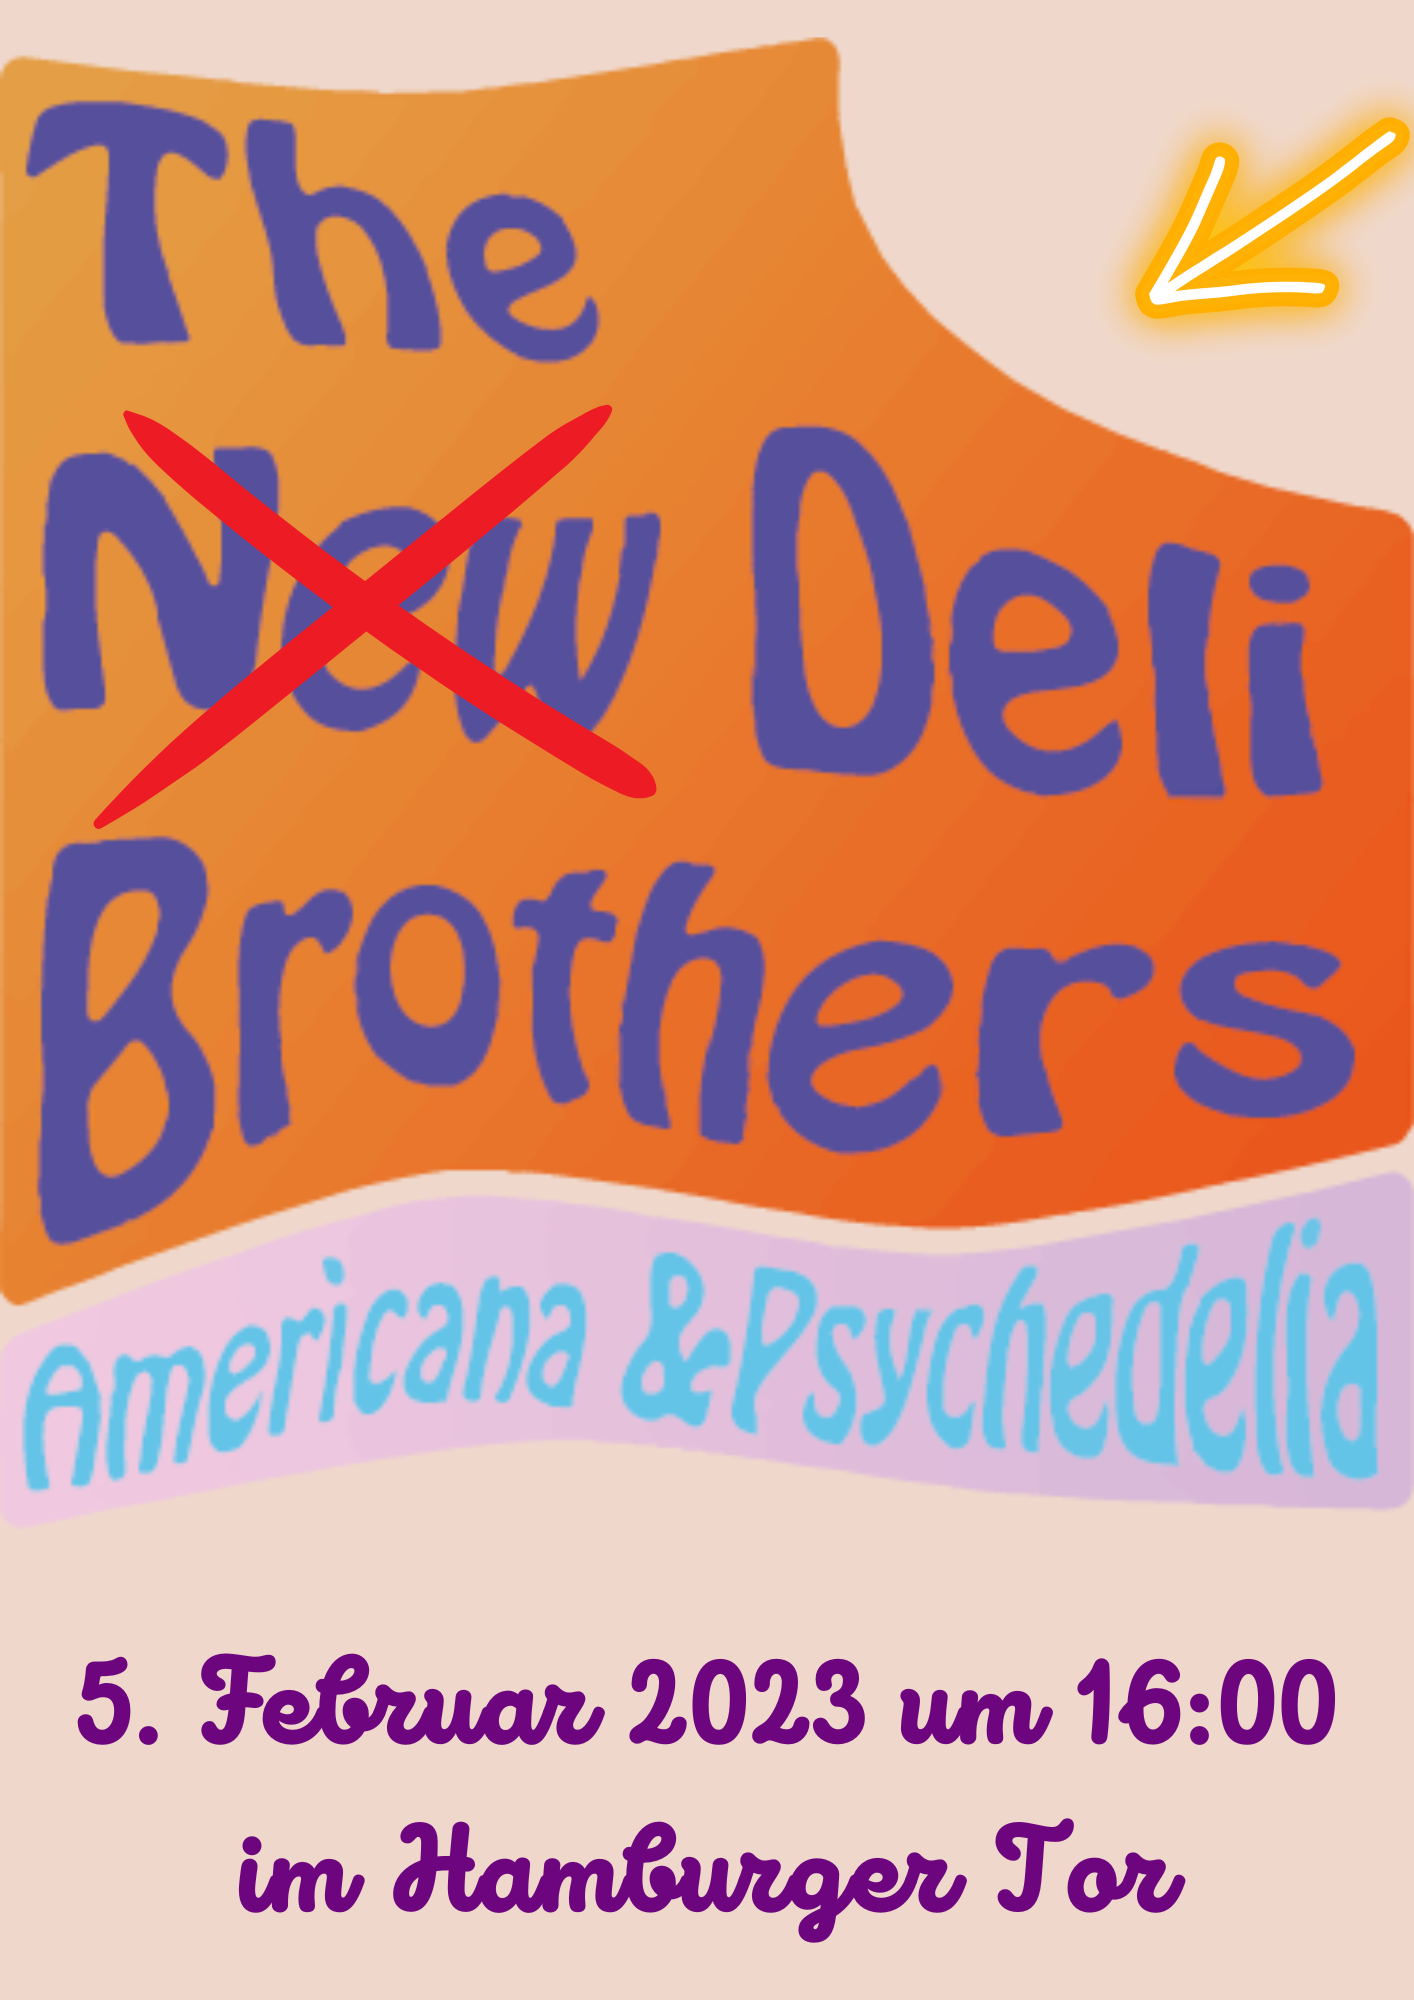 Lazy Sunday Afternoon mit (New) Deli Brothers